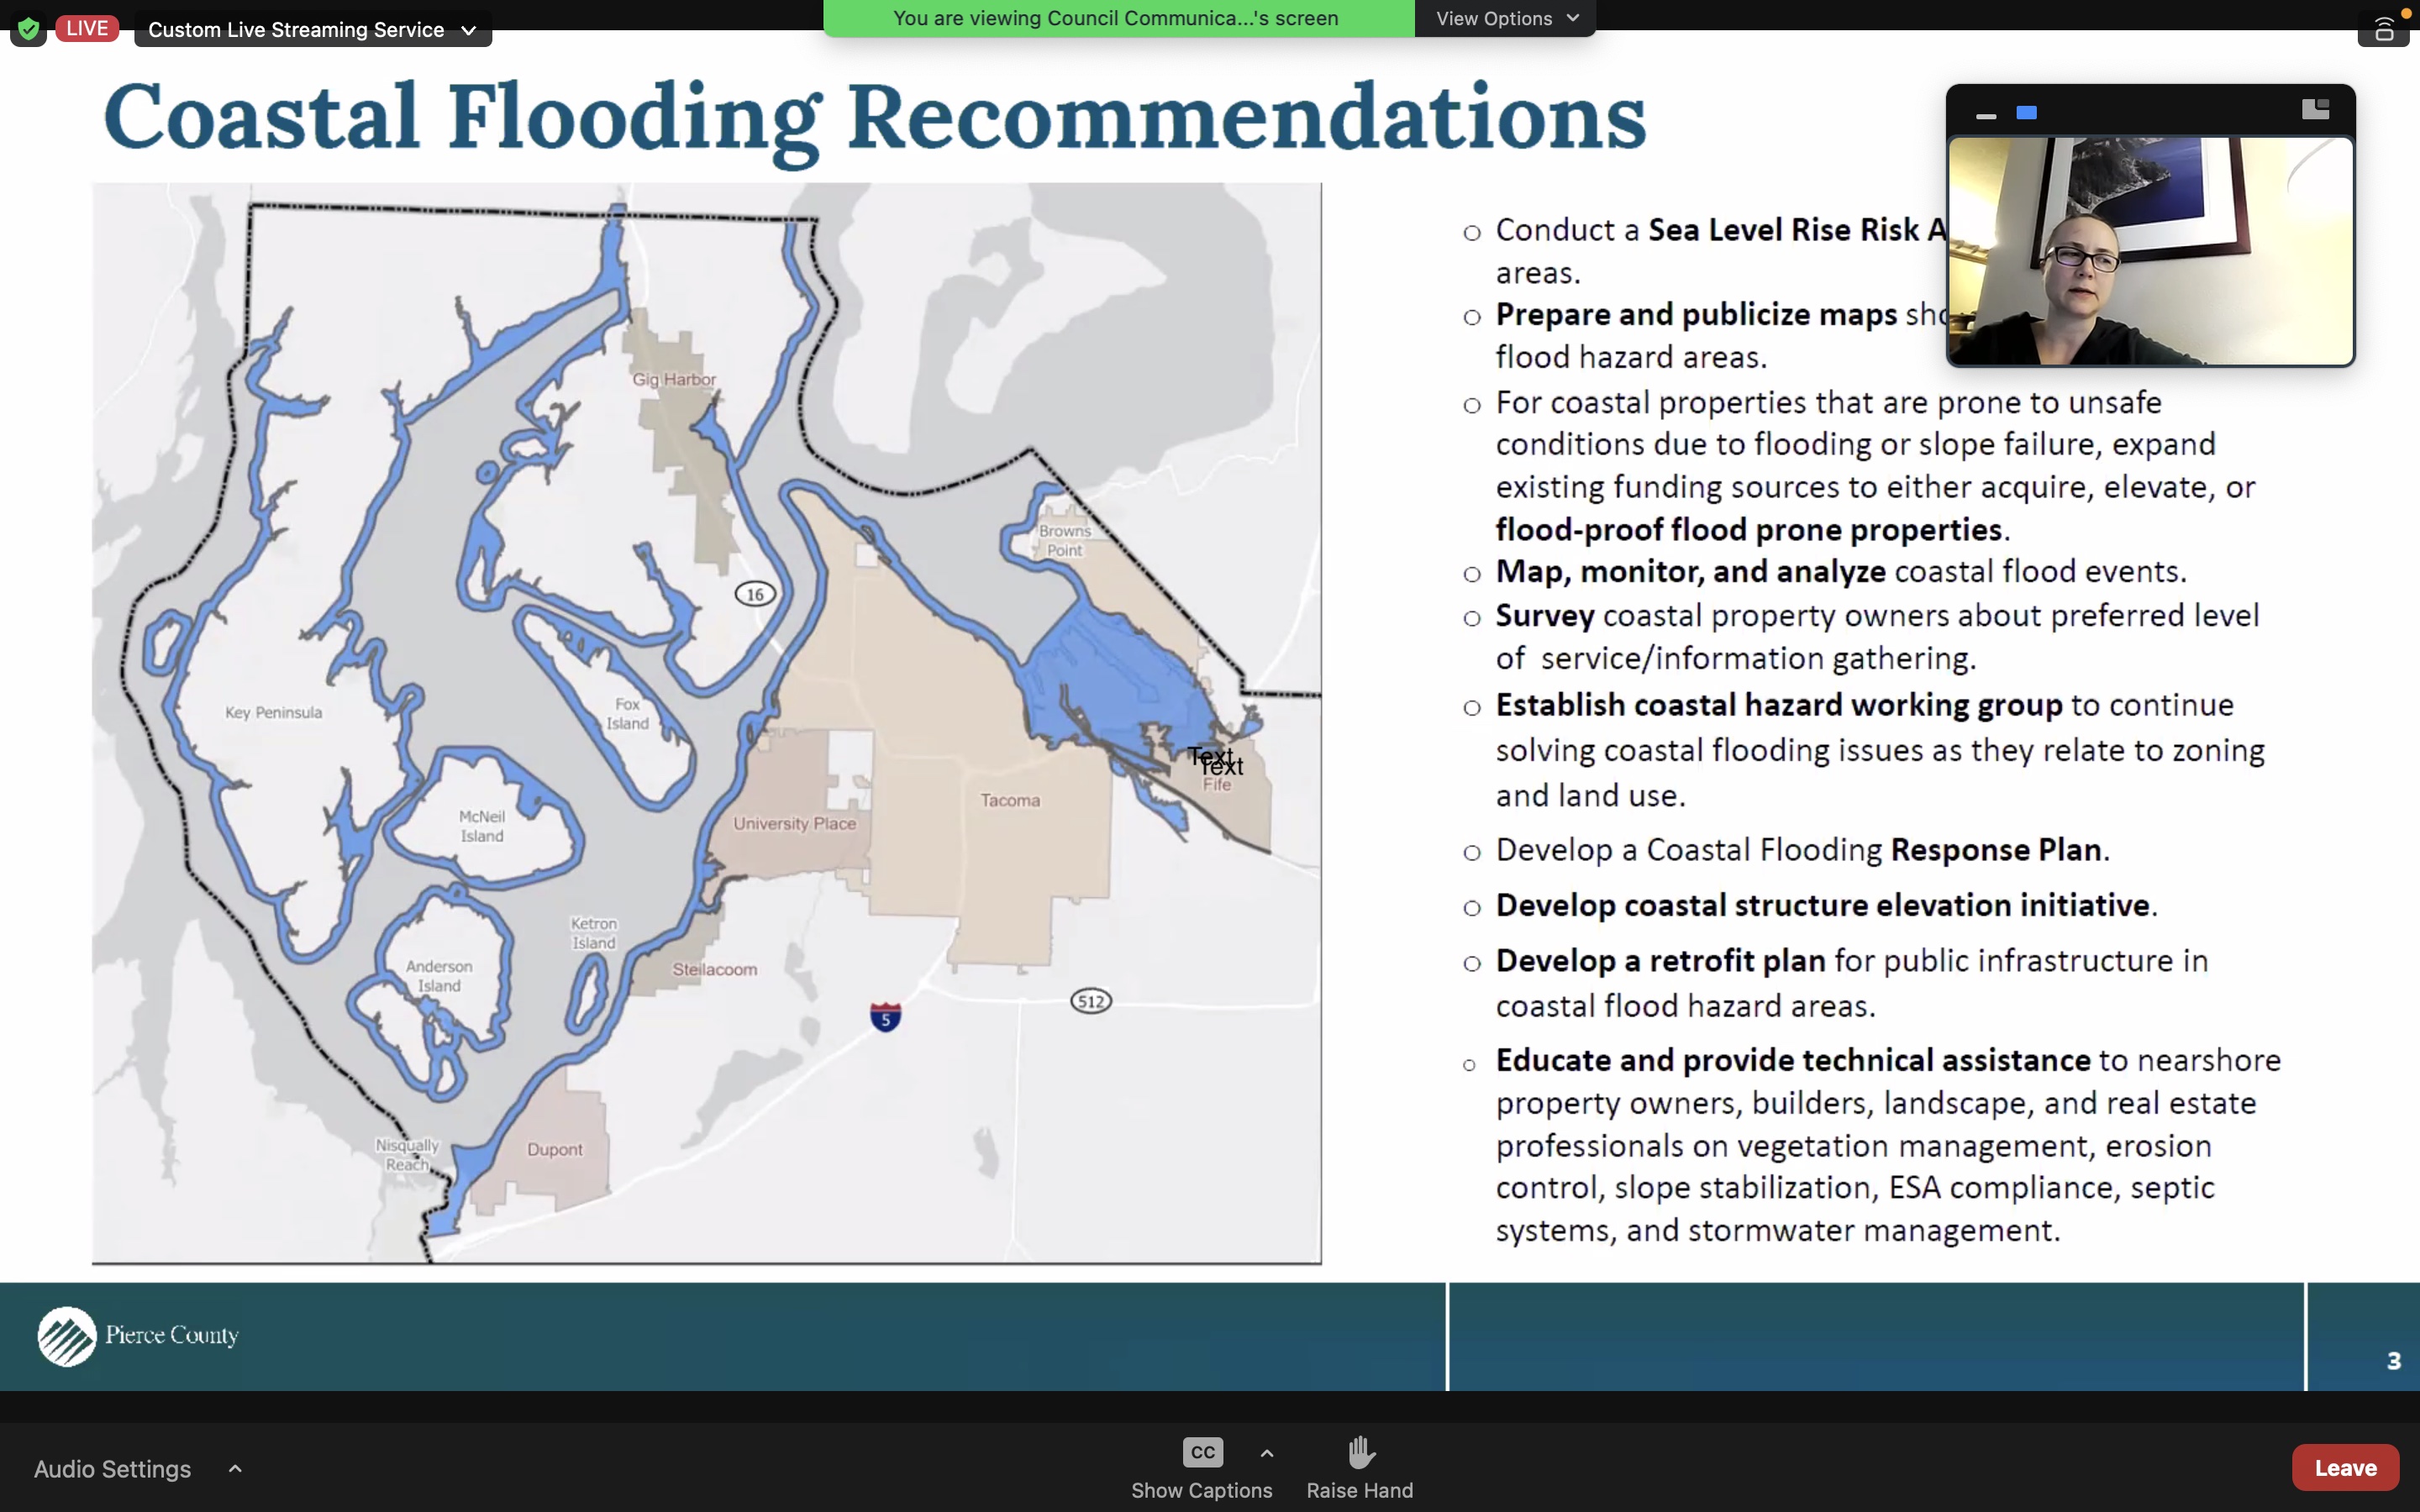 During the Oct. 17, Pierce County Council meeting, Greta Holmstrom, Pierce County Senior Planner presented responses to outstanding questions about the flood plan. (Credit: Lauren Gallup, screenshot / NWPB)